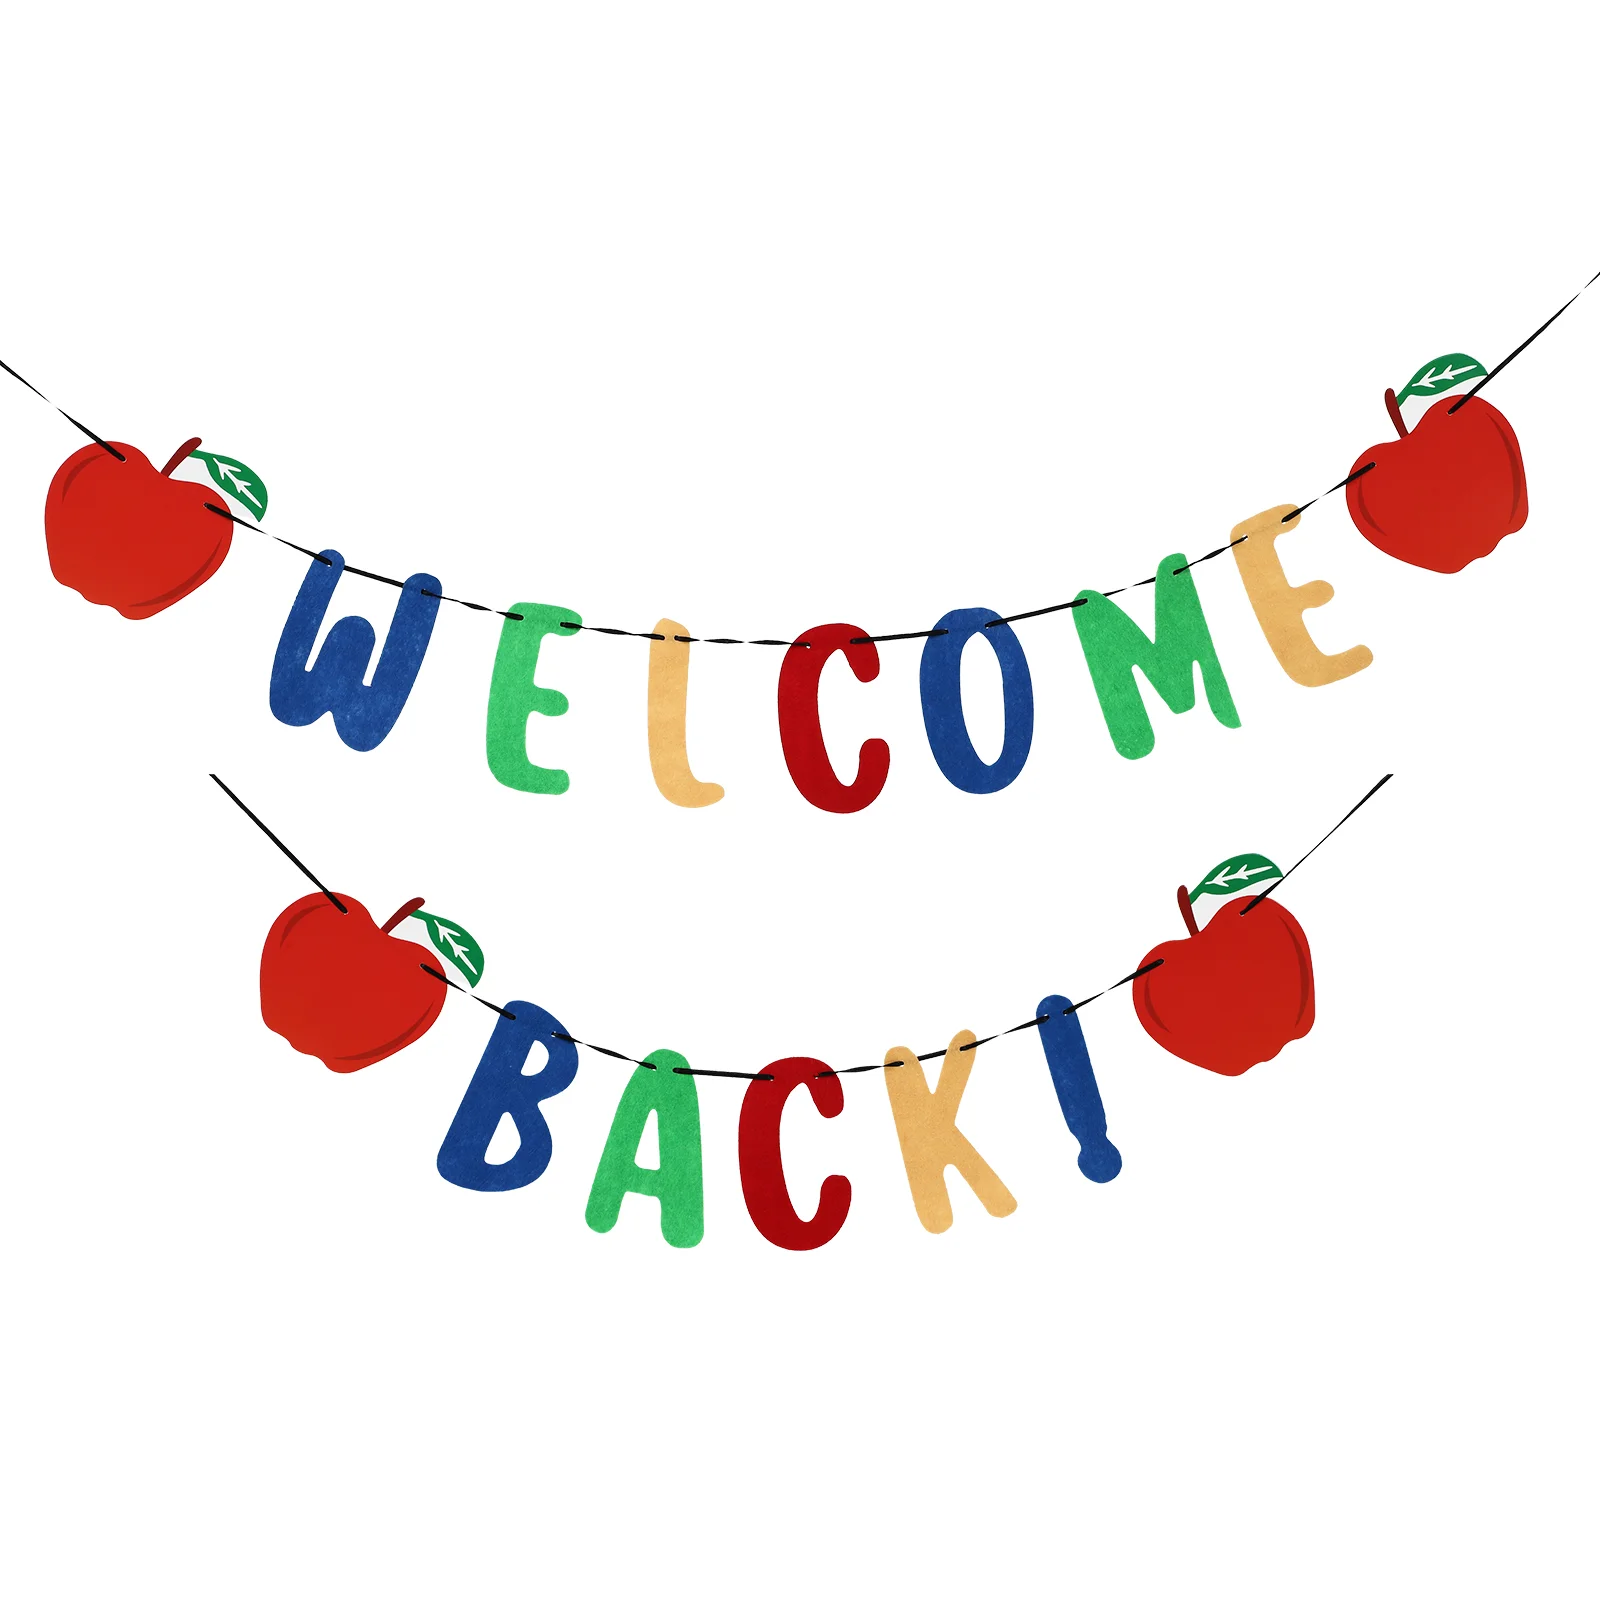 

School Banner Welcome Decorationparty Garland Daybanners Sign Hanging Home Paper Bunting First Wallsigns Decorations Kids